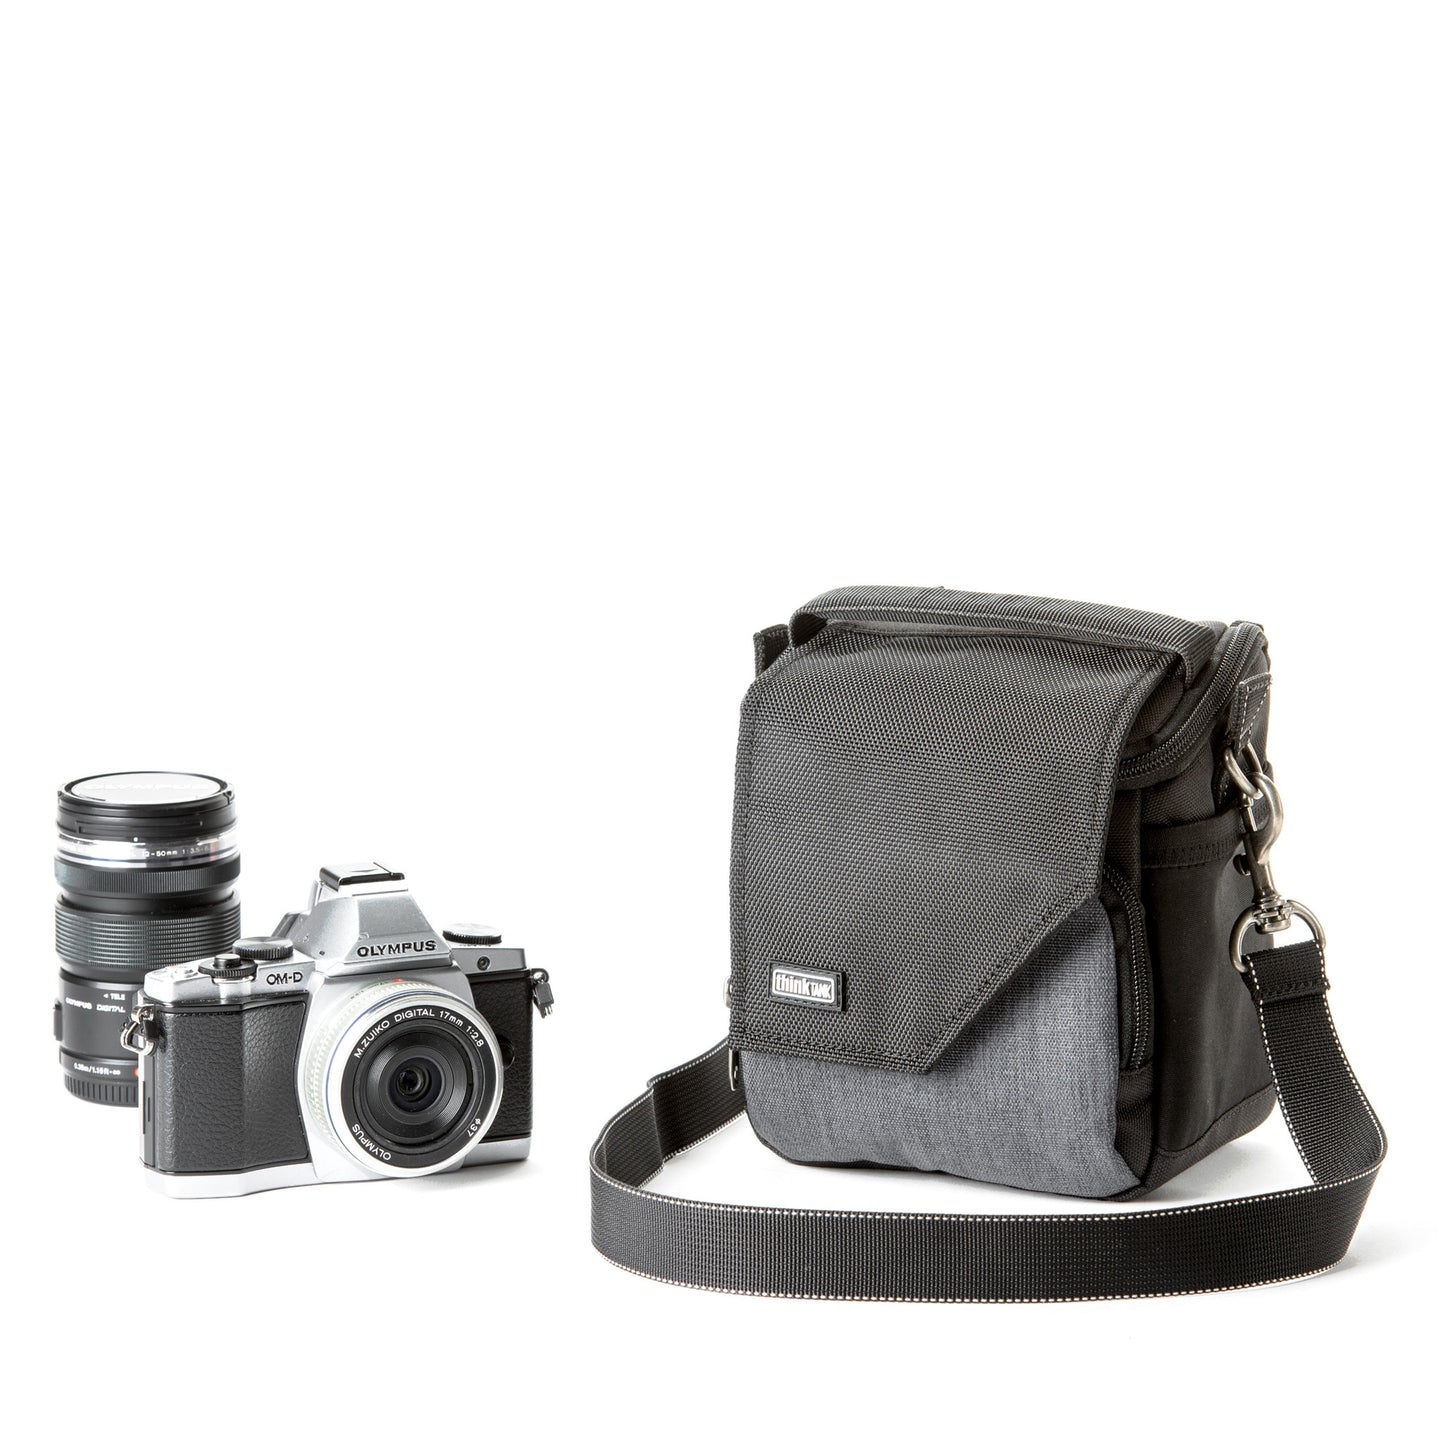 The best camera bag for any Mirrorless or Leica M system! Think